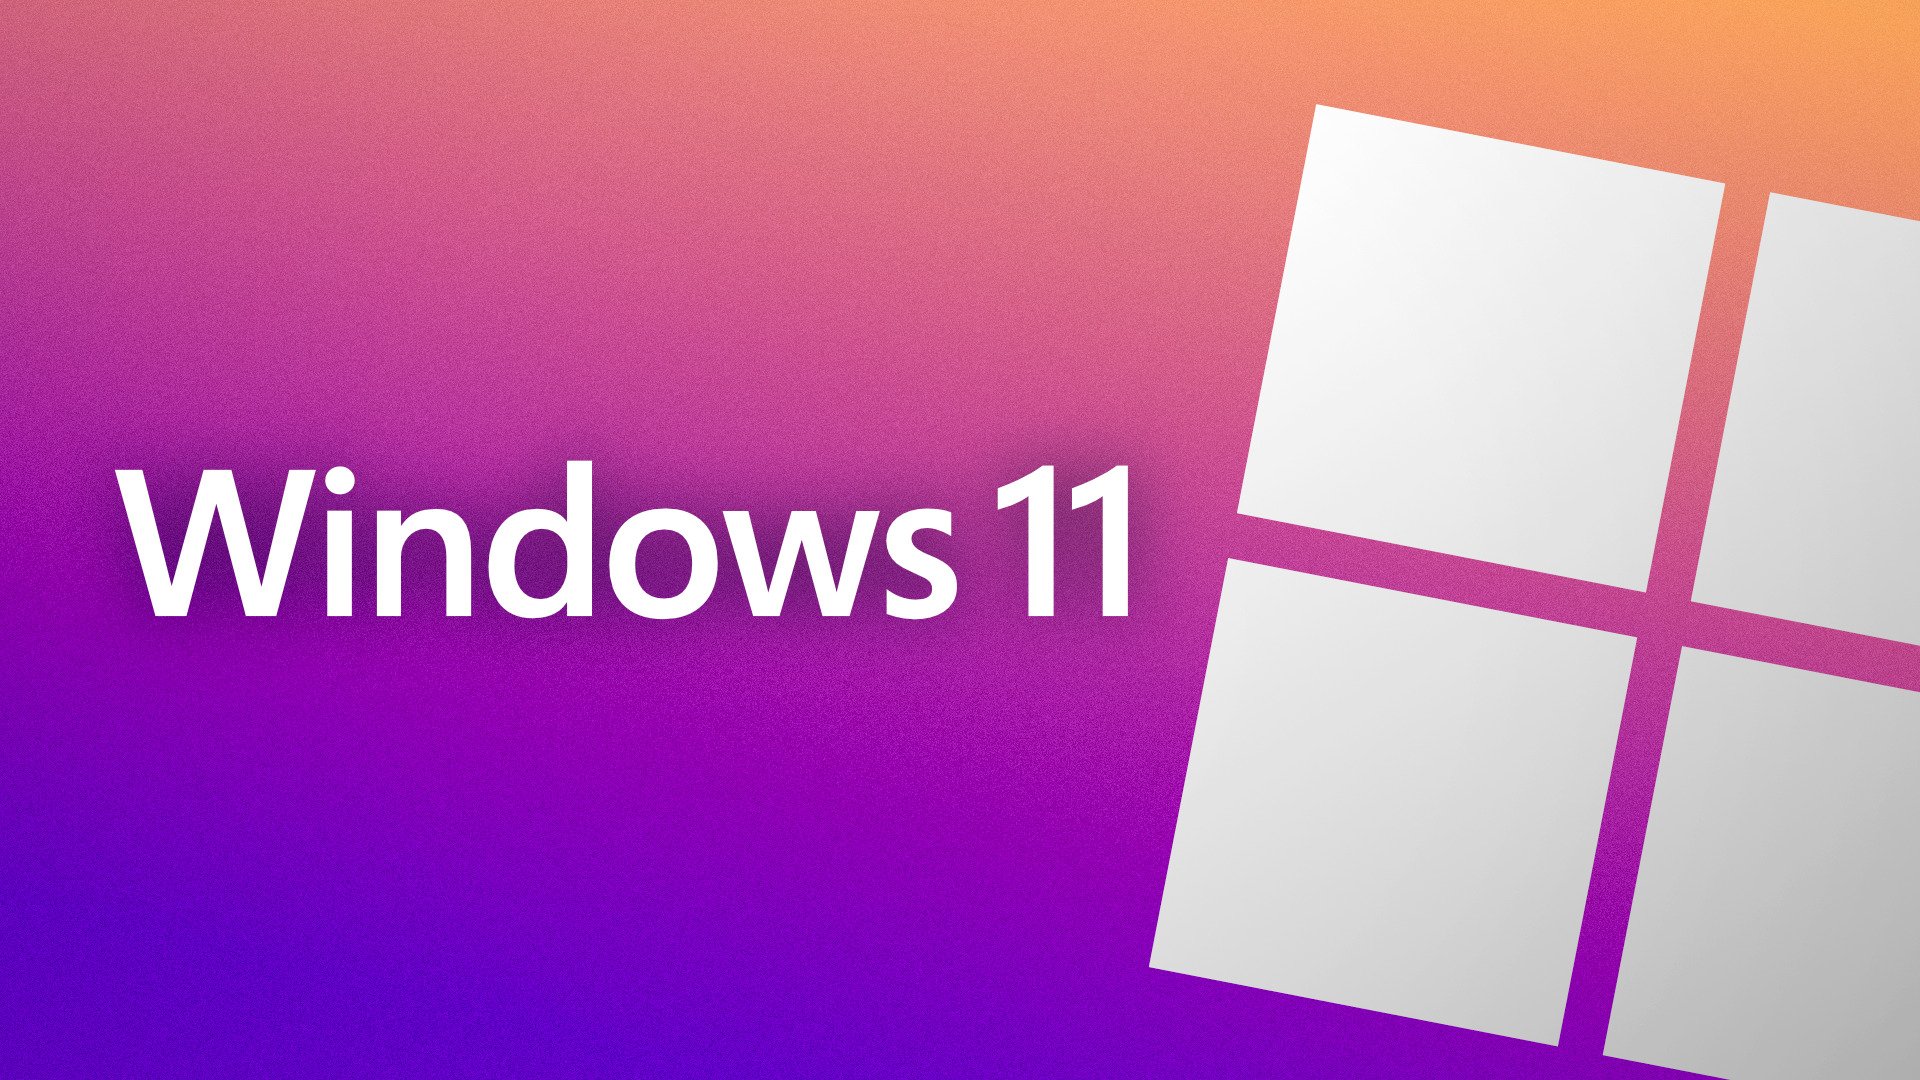 Planning to set up Windows 11 on Tuesday, when it launches?